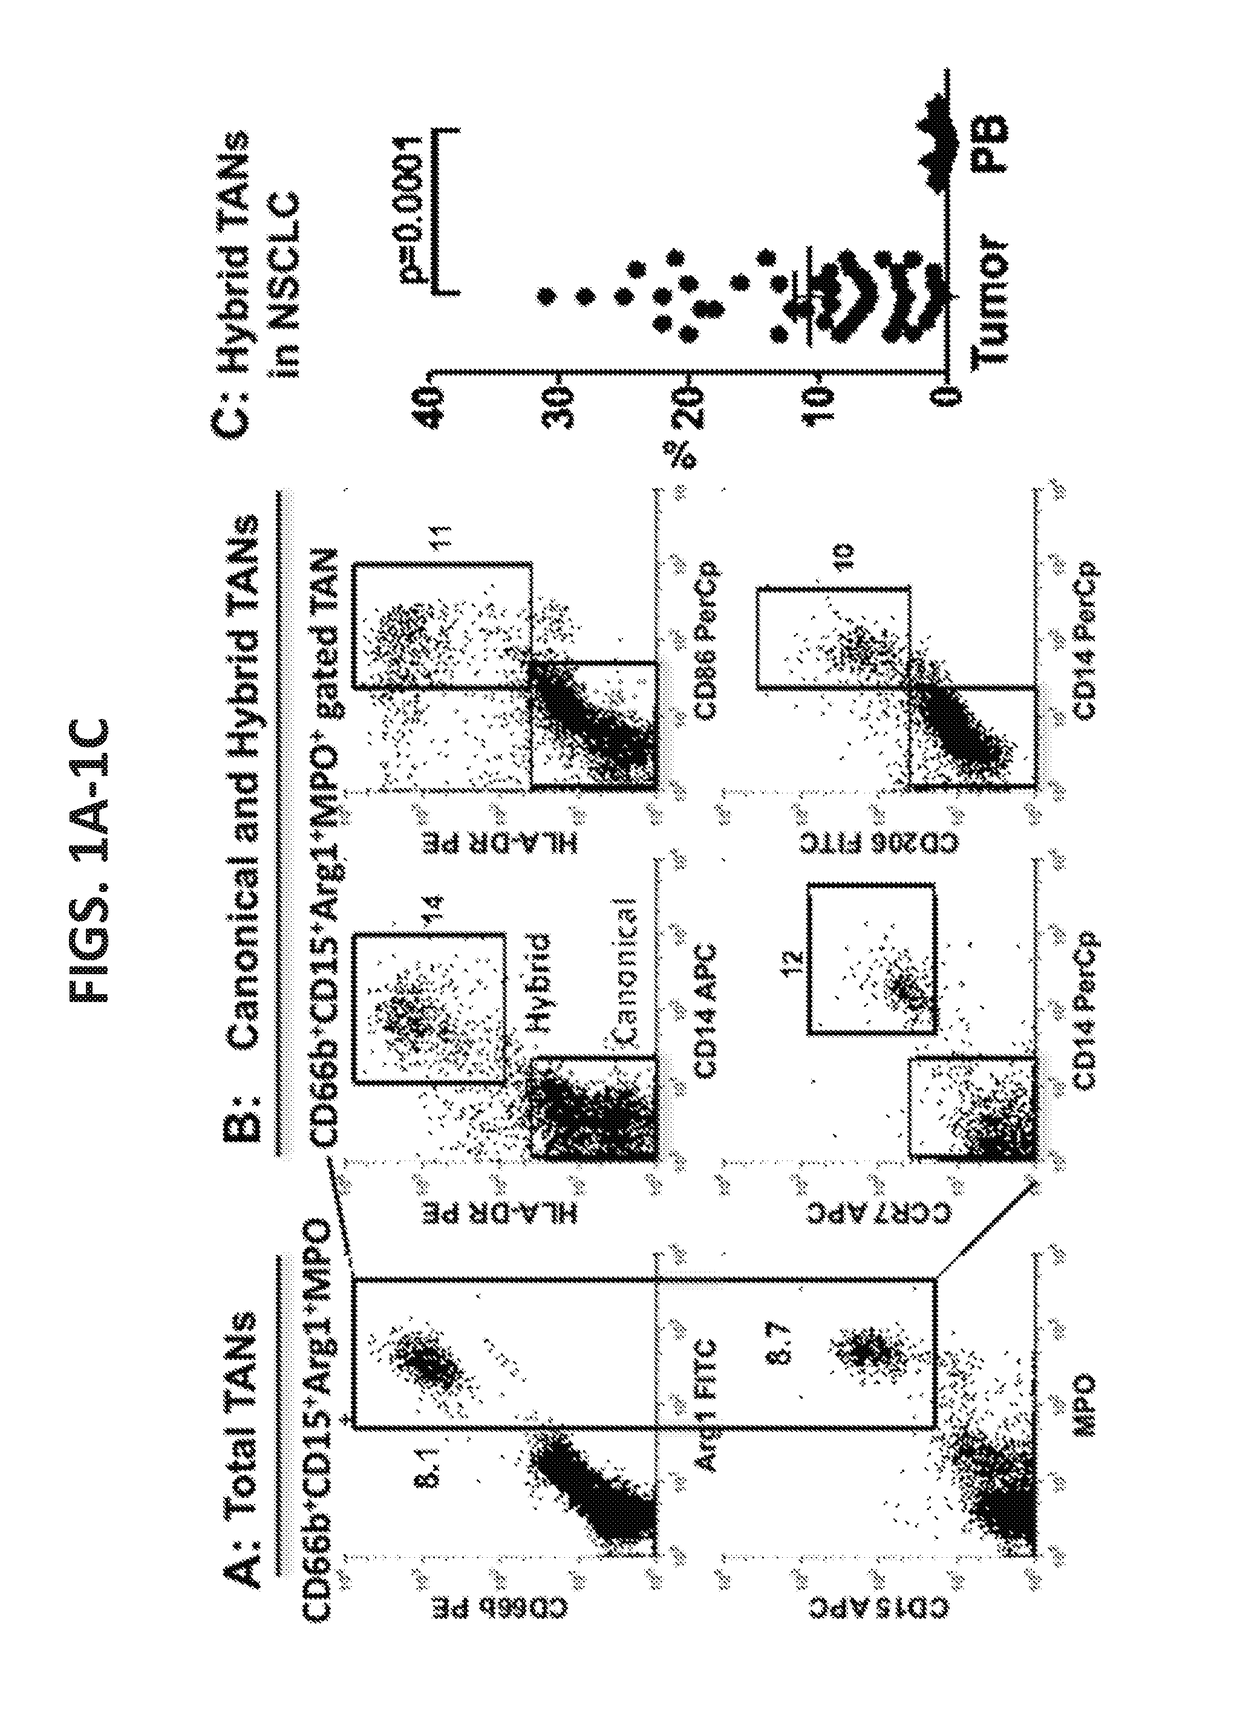 Compositions and methods of enhancing Anti-tumor response using hybrid neutrophils